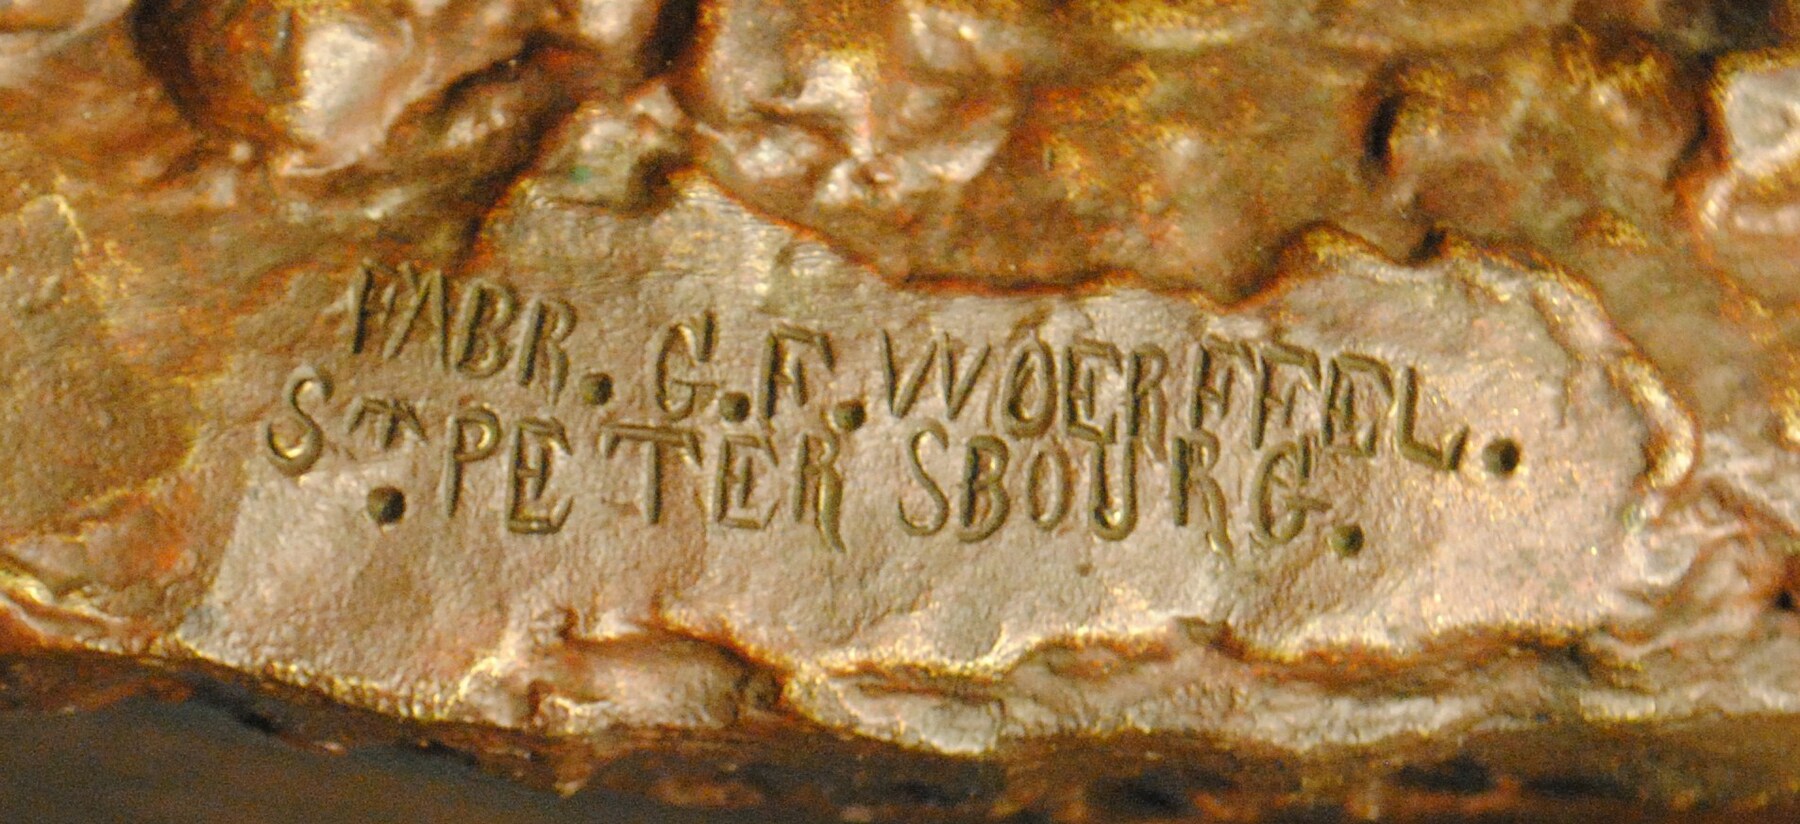 AFTER A MODEL BY VASILY GRACHEV, INSCRIBED WITH A SIGNATURE IN CYRILLIC, C.F. WOERFFEL FOUNDRY, ST PETERSBURG